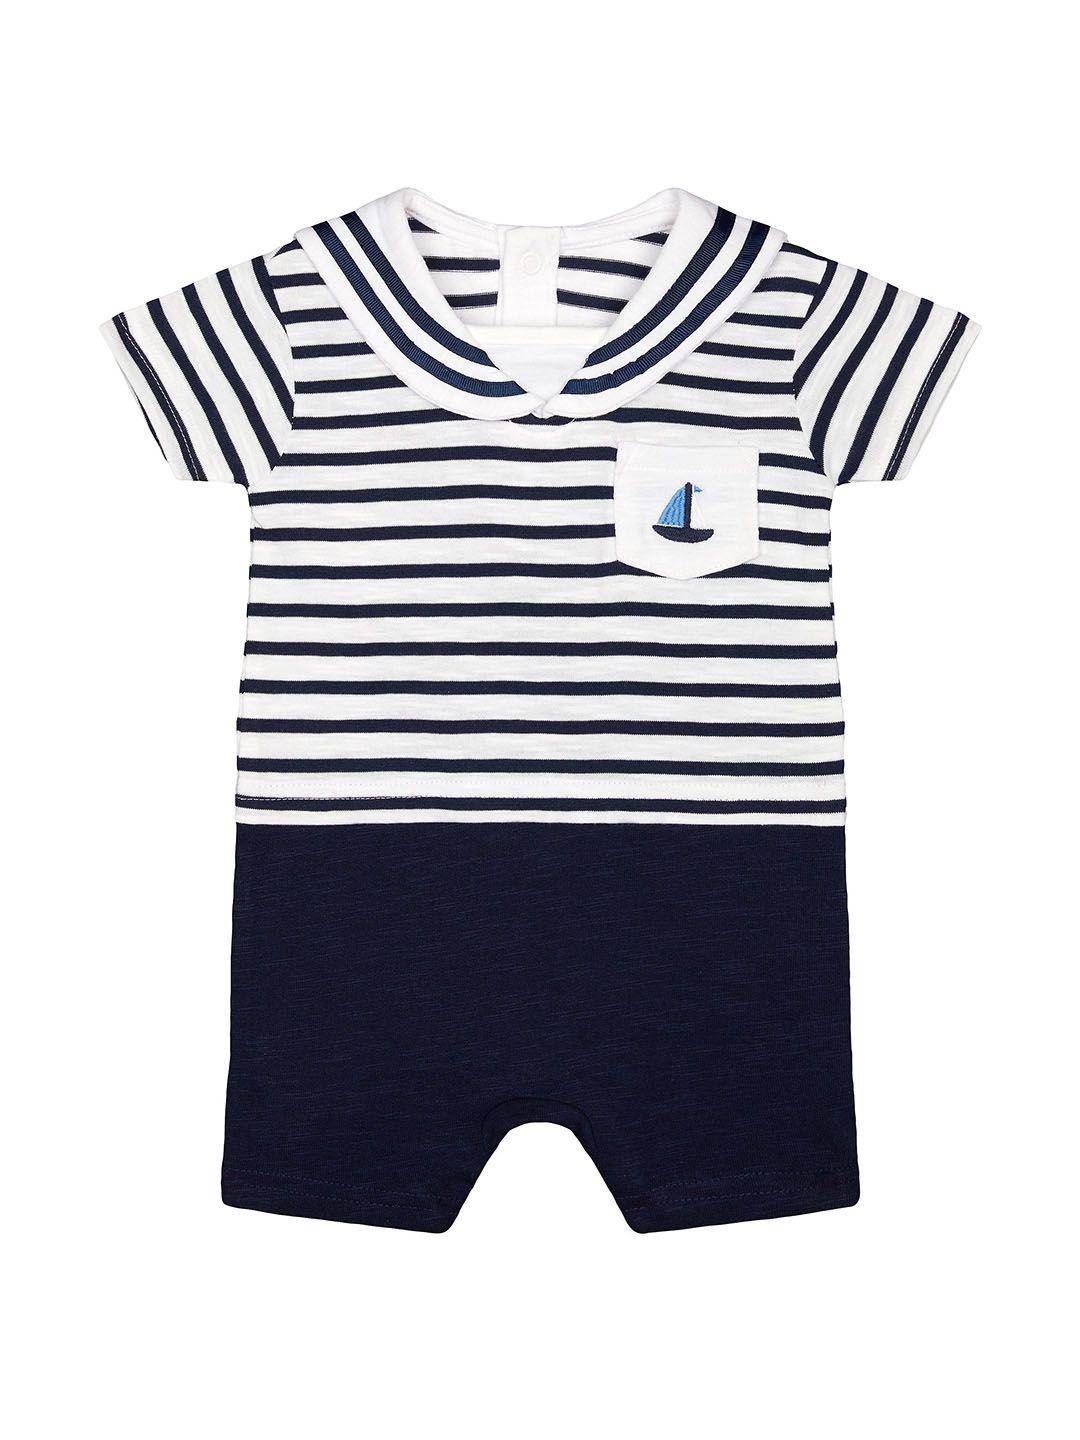 mothercare-infant-boys-navy-blue-&-white-cotton-striped-rompers